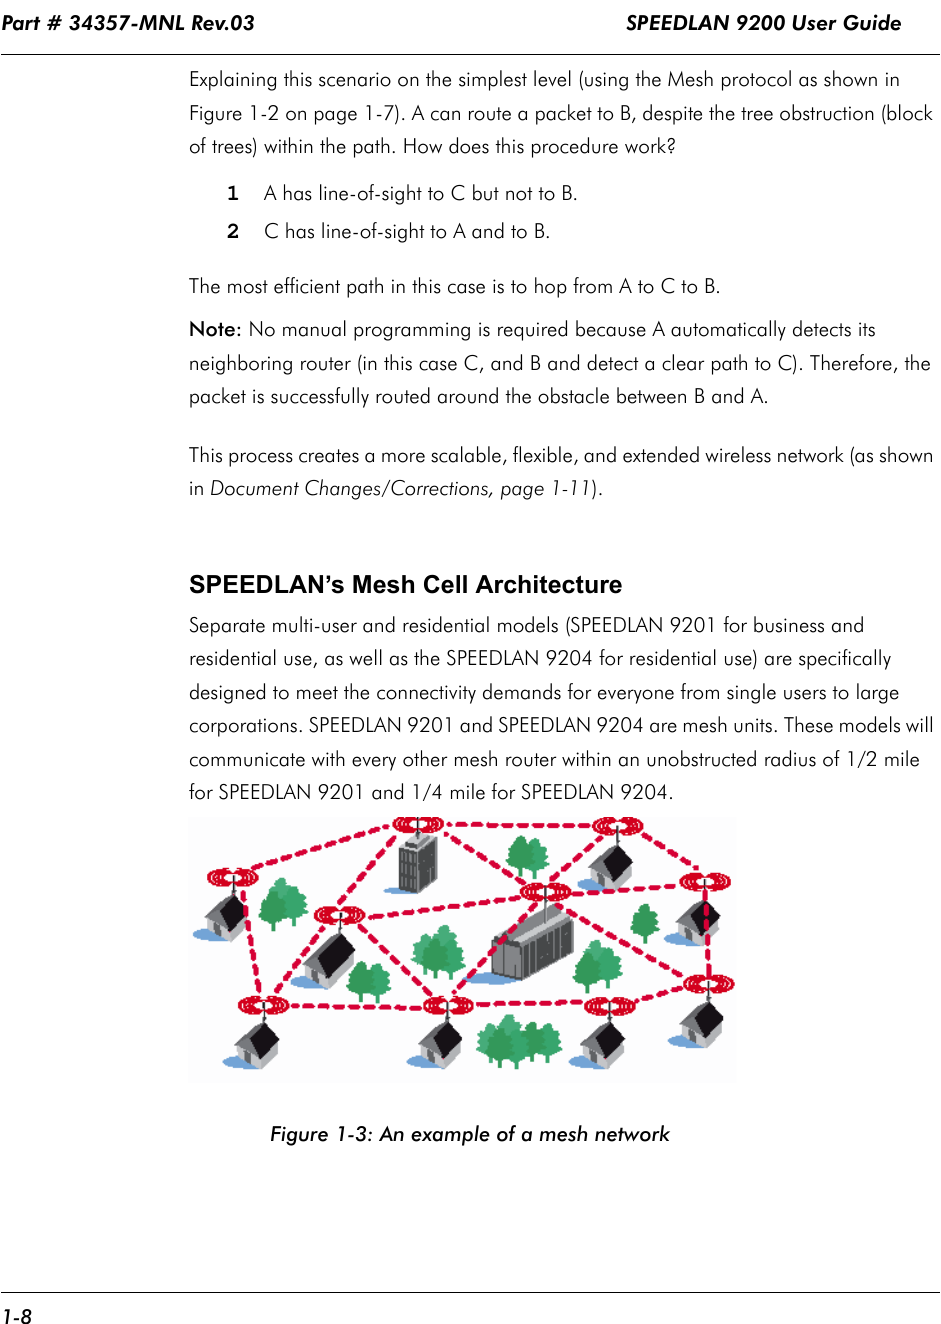 Part # 34357-MNL Rev.03                                                            SPEEDLAN 9200 User Guide 1-8Explaining this scenario on the simplest level (using the Mesh protocol as shown in Figure 1-2 on page 1-7). A can route a packet to B, despite the tree obstruction (block of trees) within the path. How does this procedure work? 1A has line-of-sight to C but not to B.2C has line-of-sight to A and to B.The most efficient path in this case is to hop from A to C to B. Note: No manual programming is required because A automatically detects its neighboring router (in this case C, and B and detect a clear path to C). Therefore, the packet is successfully routed around the obstacle between B and A. This process creates a more scalable, flexible, and extended wireless network (as shown in Document Changes/Corrections, page 1-11). SPEEDLAN’s Mesh Cell ArchitectureSeparate multi-user and residential models (SPEEDLAN 9201 for business and residential use, as well as the SPEEDLAN 9204 for residential use) are specifically designed to meet the connectivity demands for everyone from single users to large corporations. SPEEDLAN 9201 and SPEEDLAN 9204 are mesh units. These models will communicate with every other mesh router within an unobstructed radius of 1/2 mile for SPEEDLAN 9201 and 1/4 mile for SPEEDLAN 9204.     Figure 1-3: An example of a mesh network 